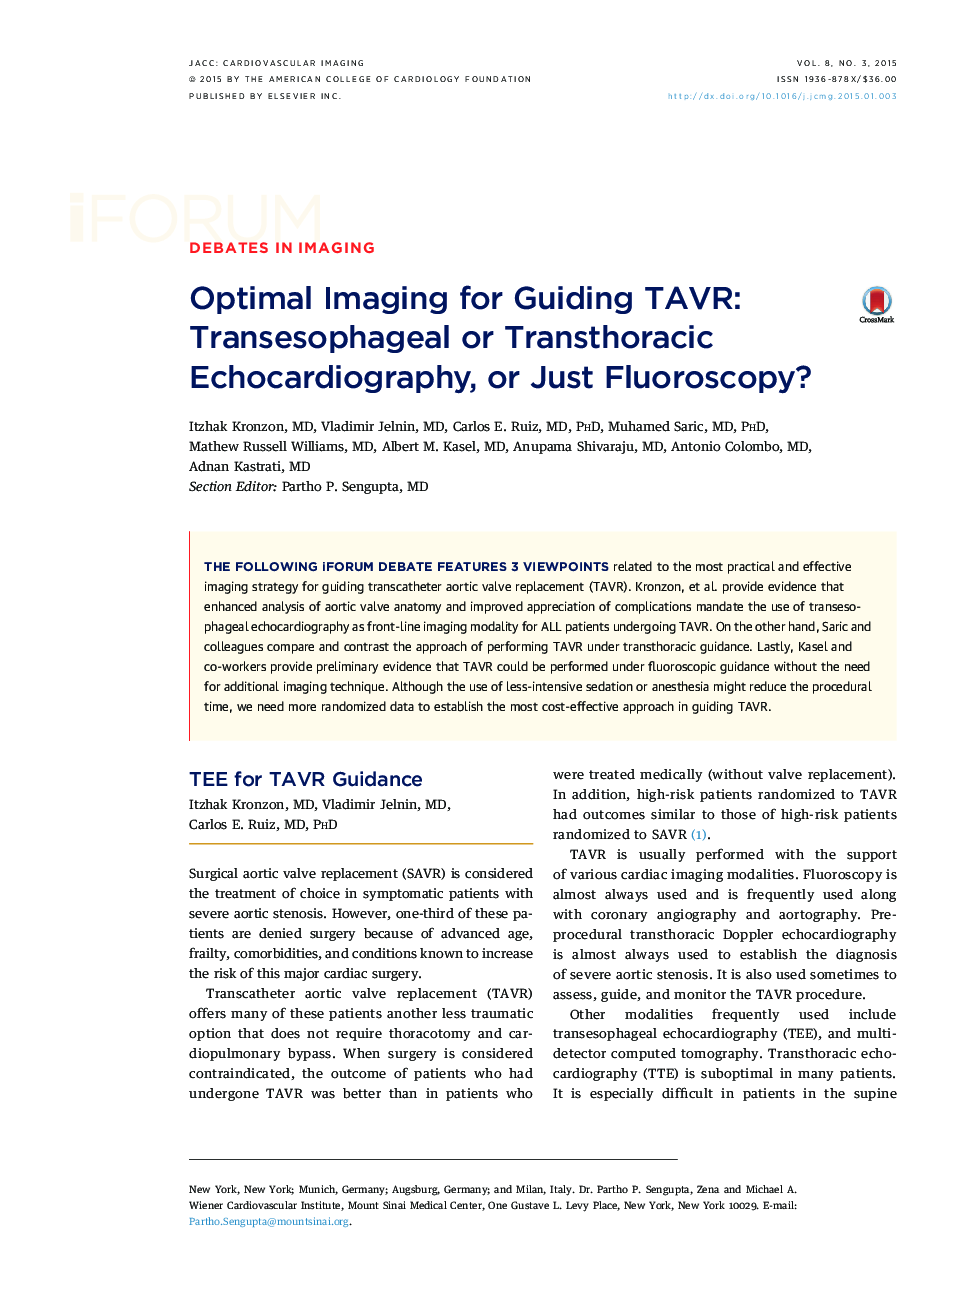 Optimal Imaging for Guiding TAVR: Transesophageal or Transthoracic Echocardiography, or Just Fluoroscopy?